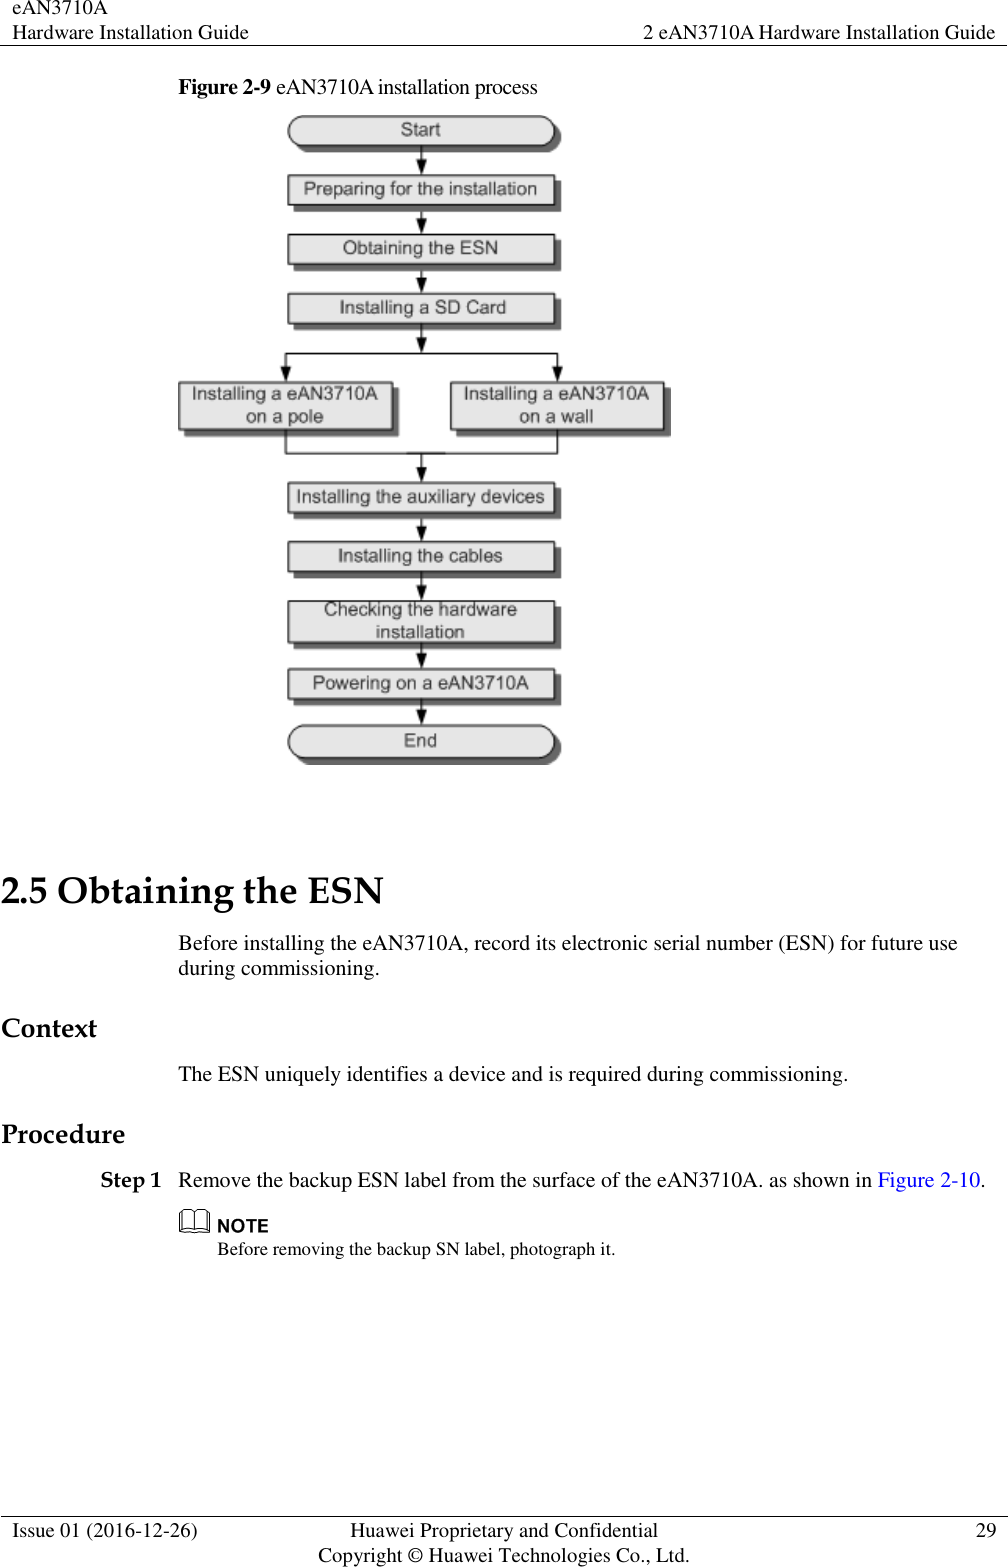 eAN3710A Hardware Installation Guide 2 eAN3710A Hardware Installation Guide  Issue 01 (2016-12-26) Huawei Proprietary and Confidential                                     Copyright © Huawei Technologies Co., Ltd. 29  Figure 2-9 eAN3710A installation process   2.5 Obtaining the ESN Before installing the eAN3710A, record its electronic serial number (ESN) for future use during commissioning. Context The ESN uniquely identifies a device and is required during commissioning. Procedure Step 1 Remove the backup ESN label from the surface of the eAN3710A. as shown in Figure 2-10.  Before removing the backup SN label, photograph it.     